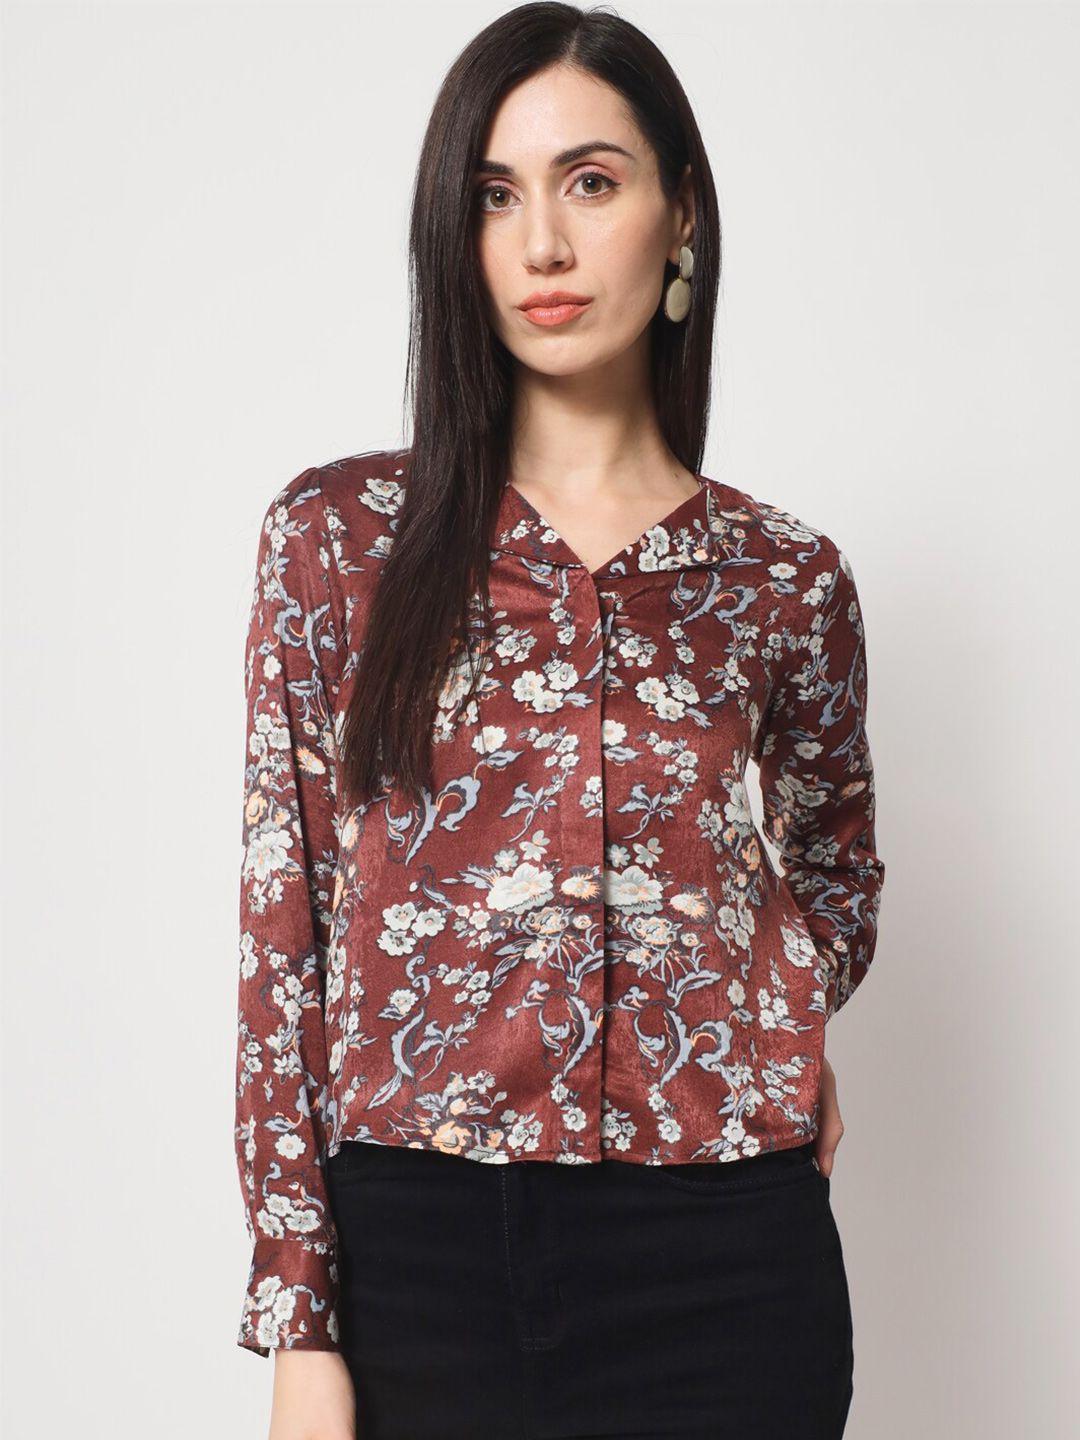 charmgal women classic floral printed casual shirt